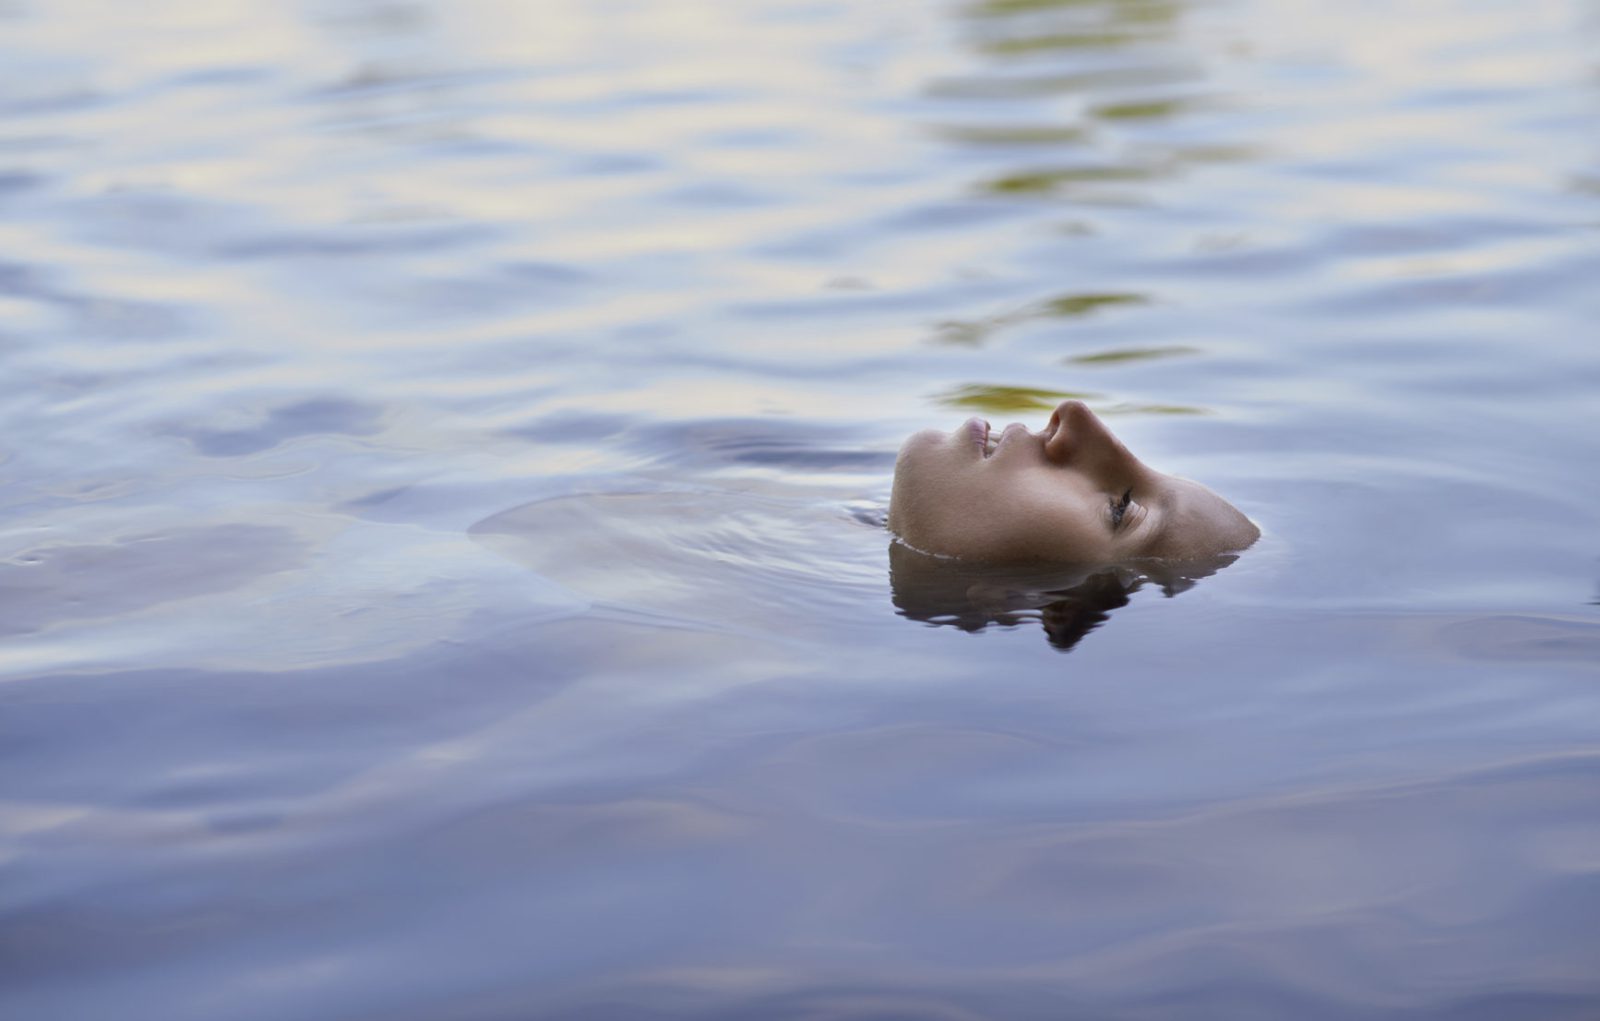 Conceptual image of a woman's face in rippled water